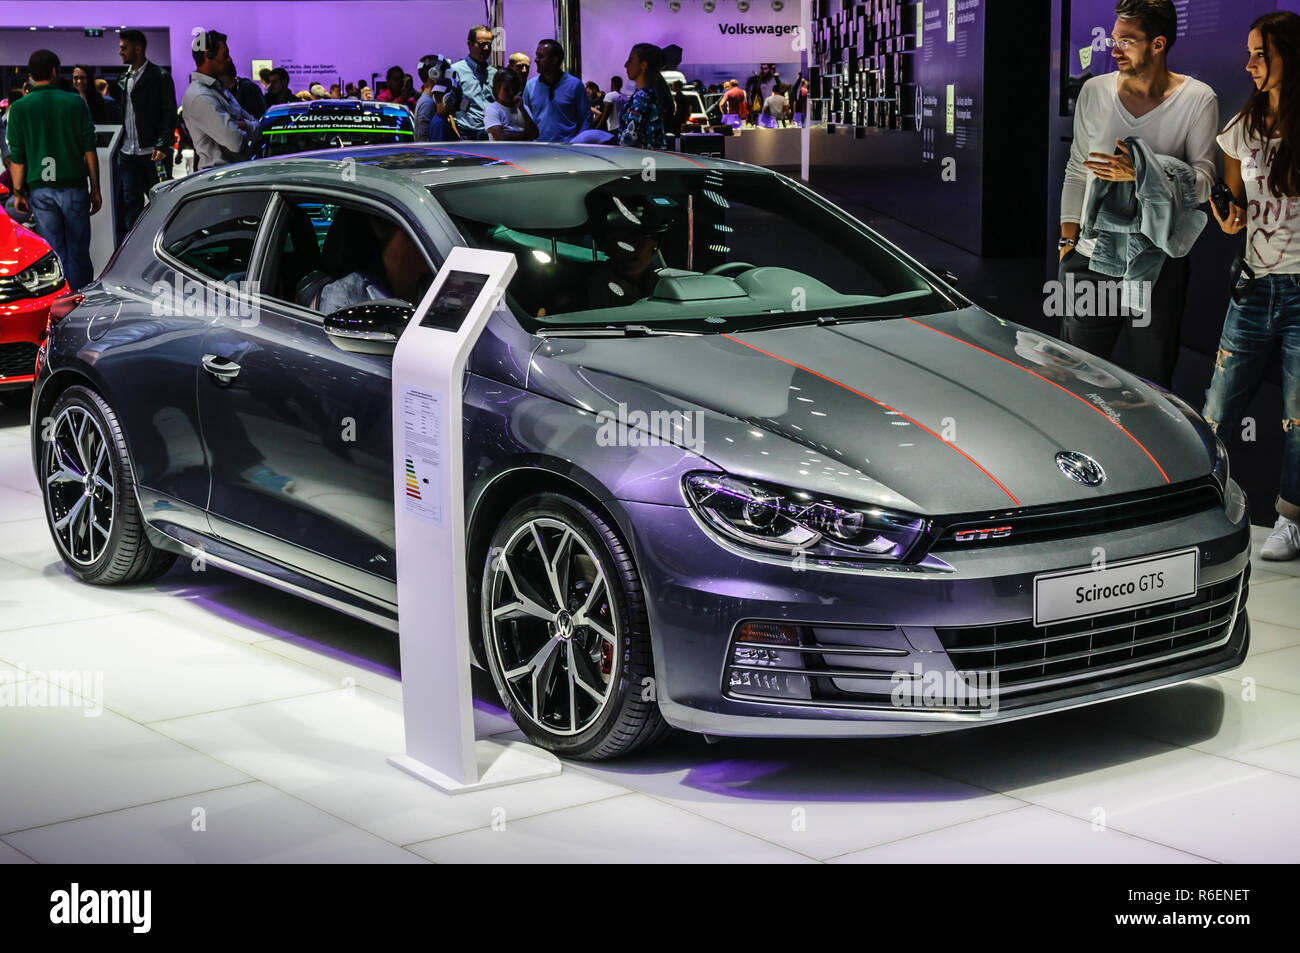 Page 2 Volkswagen Scirocco High Resolution Stock Photography And Images Alamy